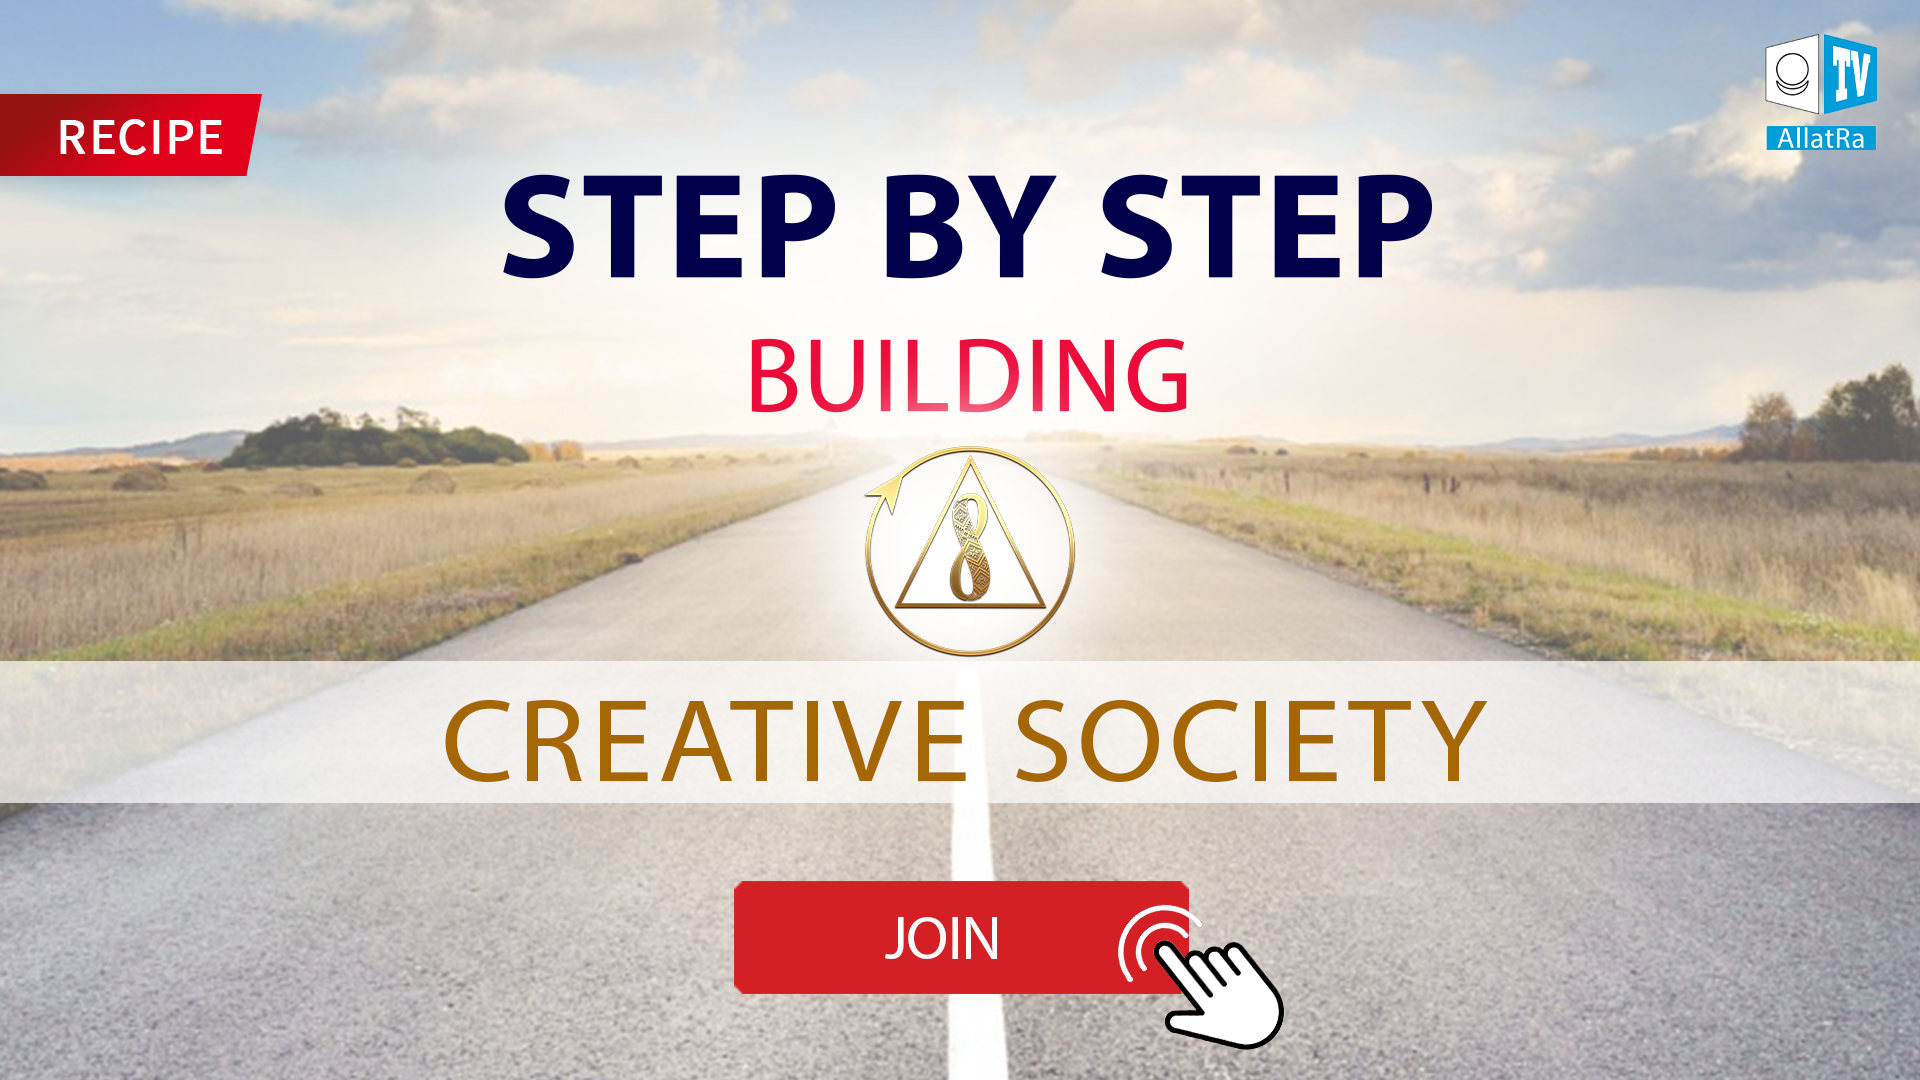 How To build the Creative Society Step By Step